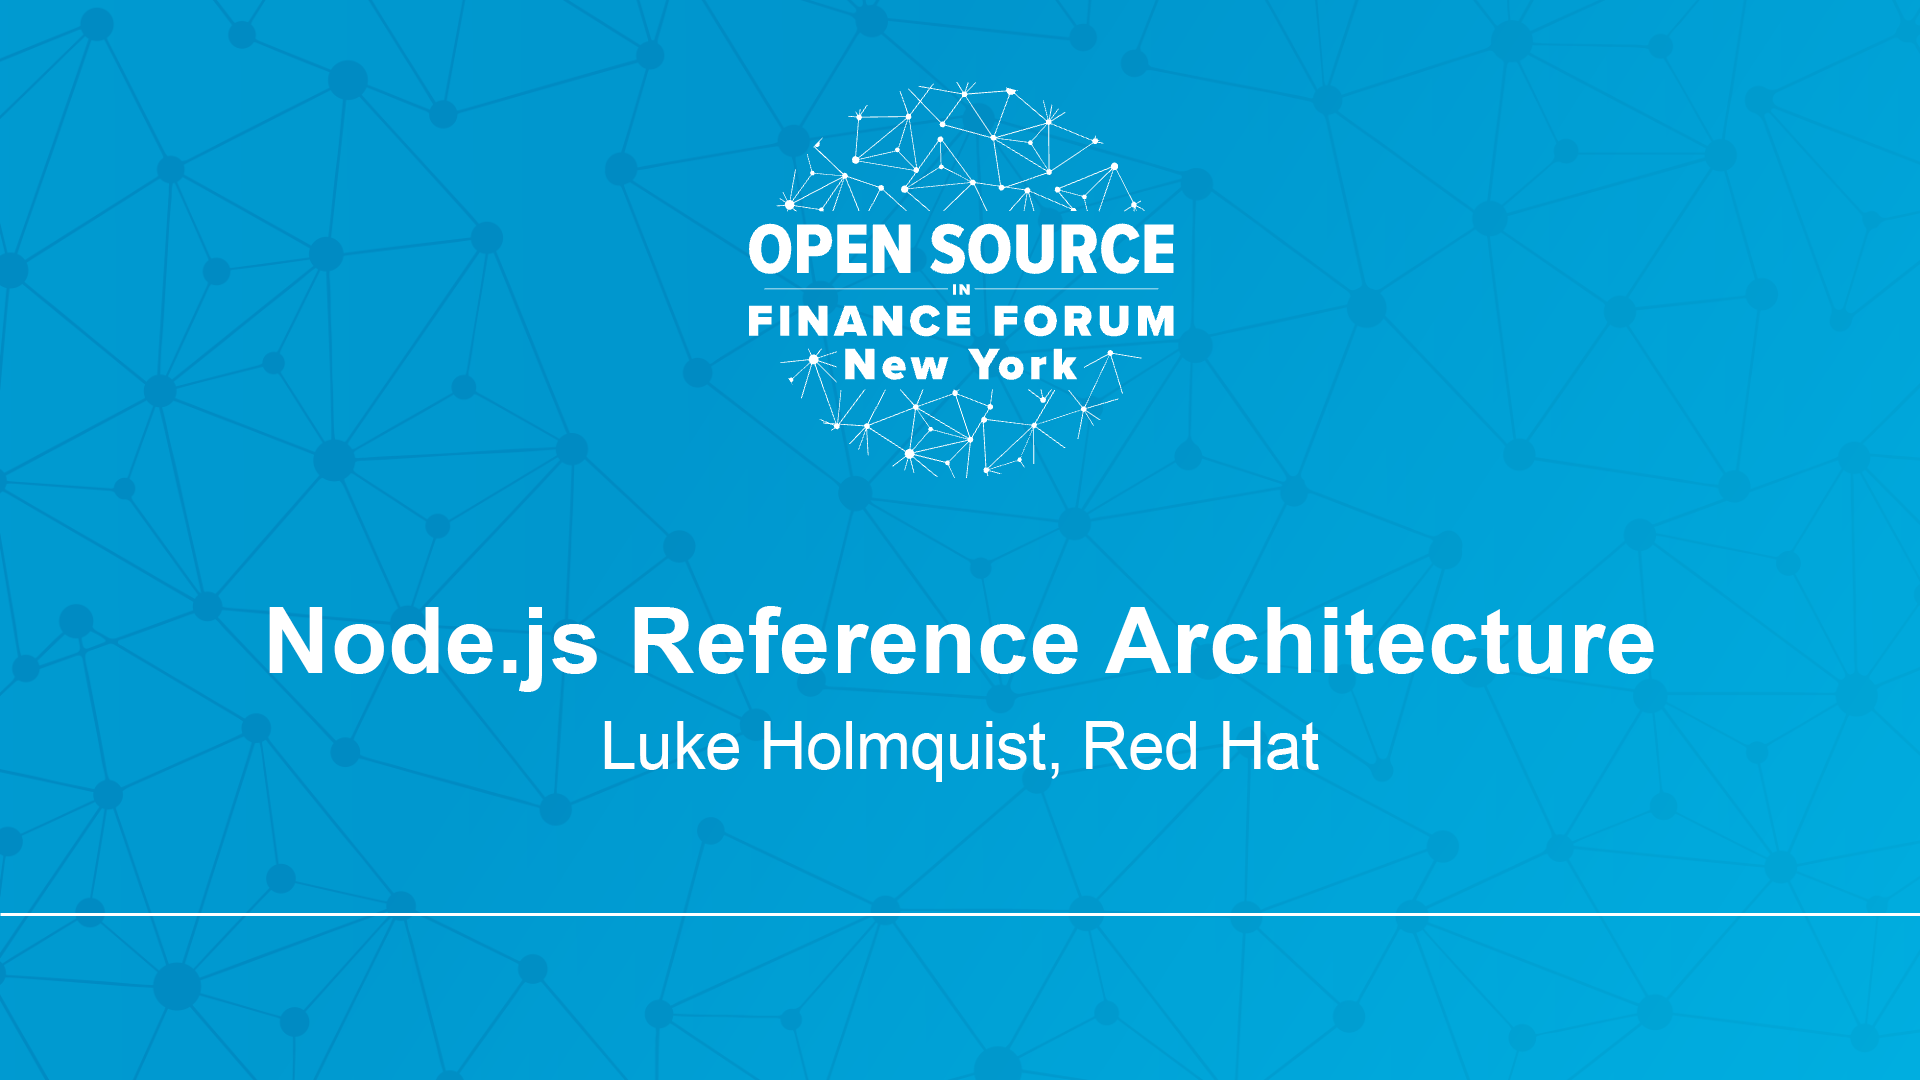 Node.js Reference Architecture - Luke Holmquist, Red Hat